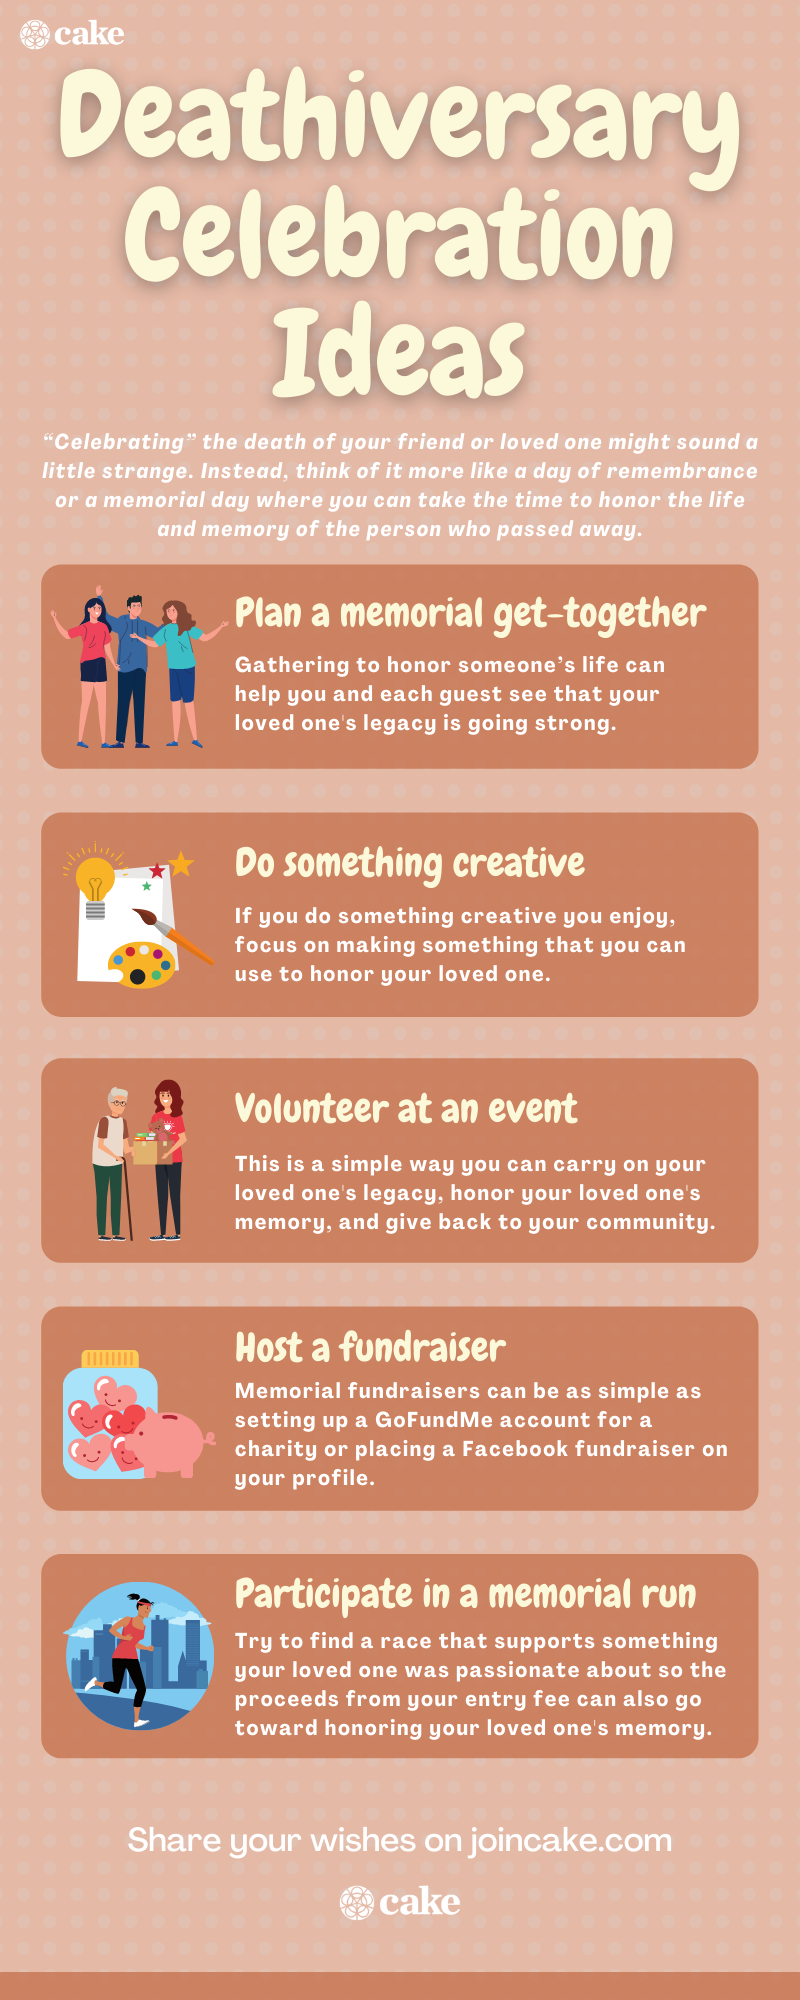 Infographic of celebration ideas for a death anniversary